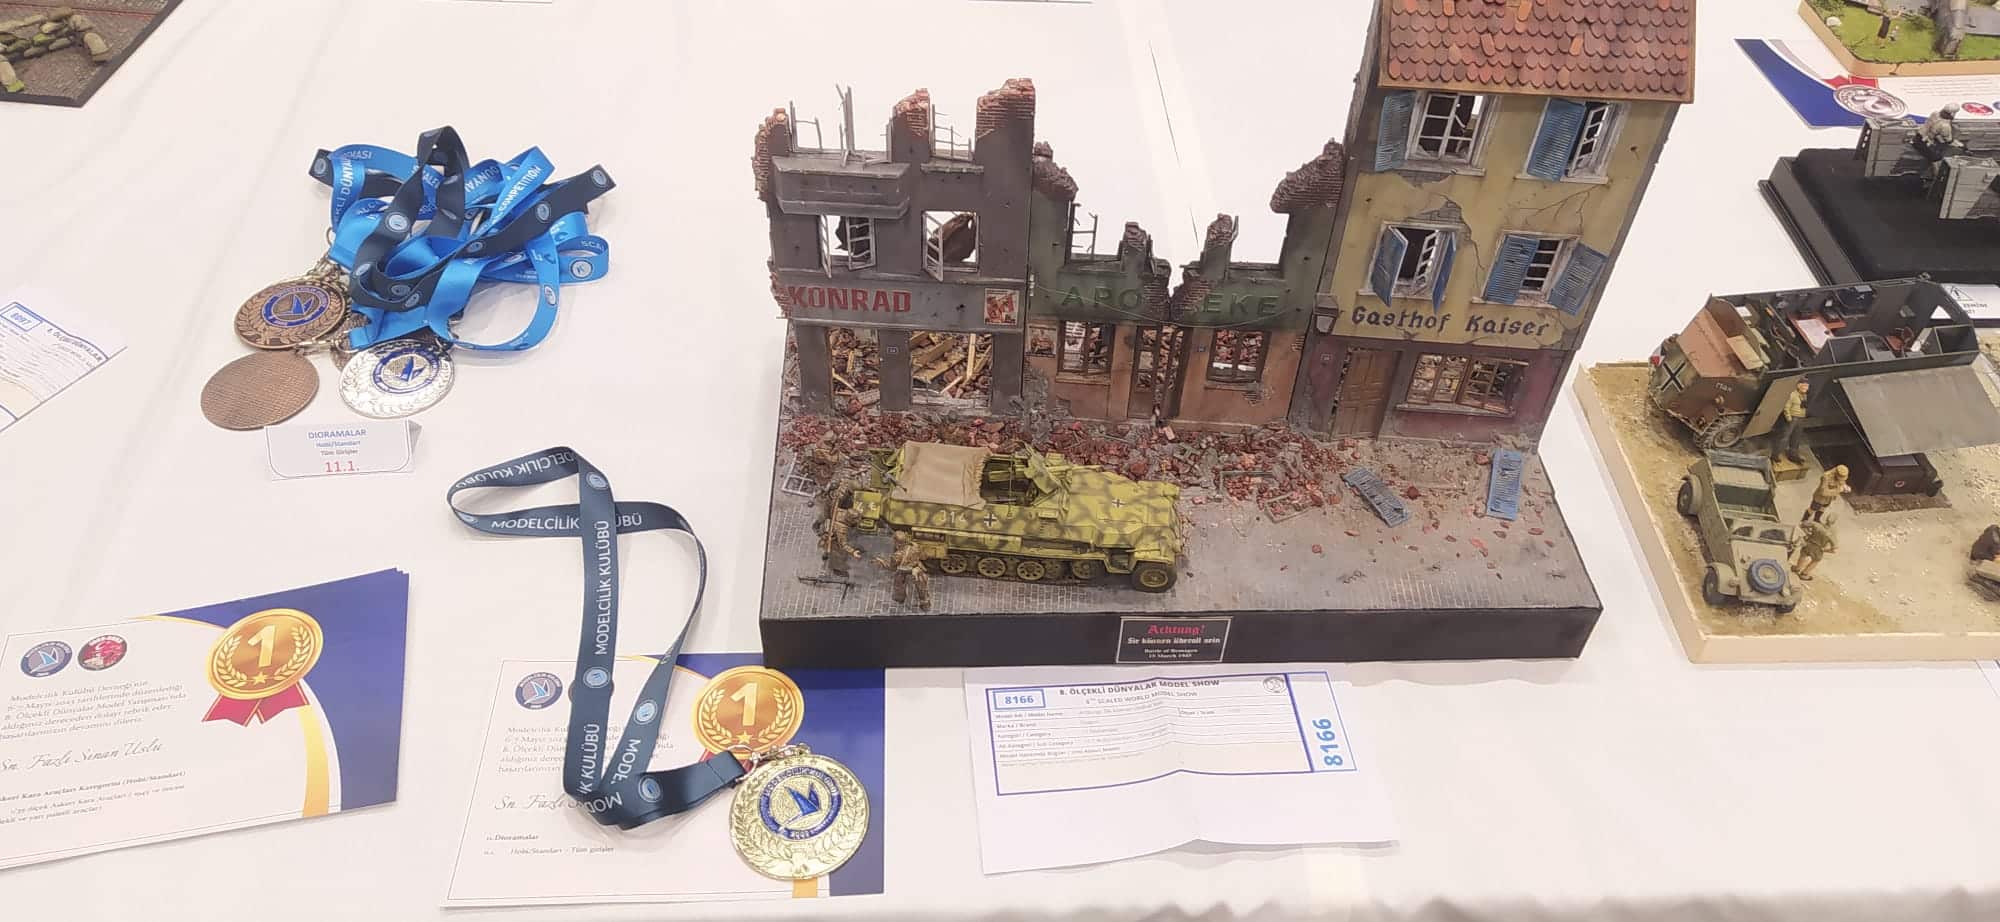 8th Scaled Worlds Model Show "Diorama" 1st prize.-2